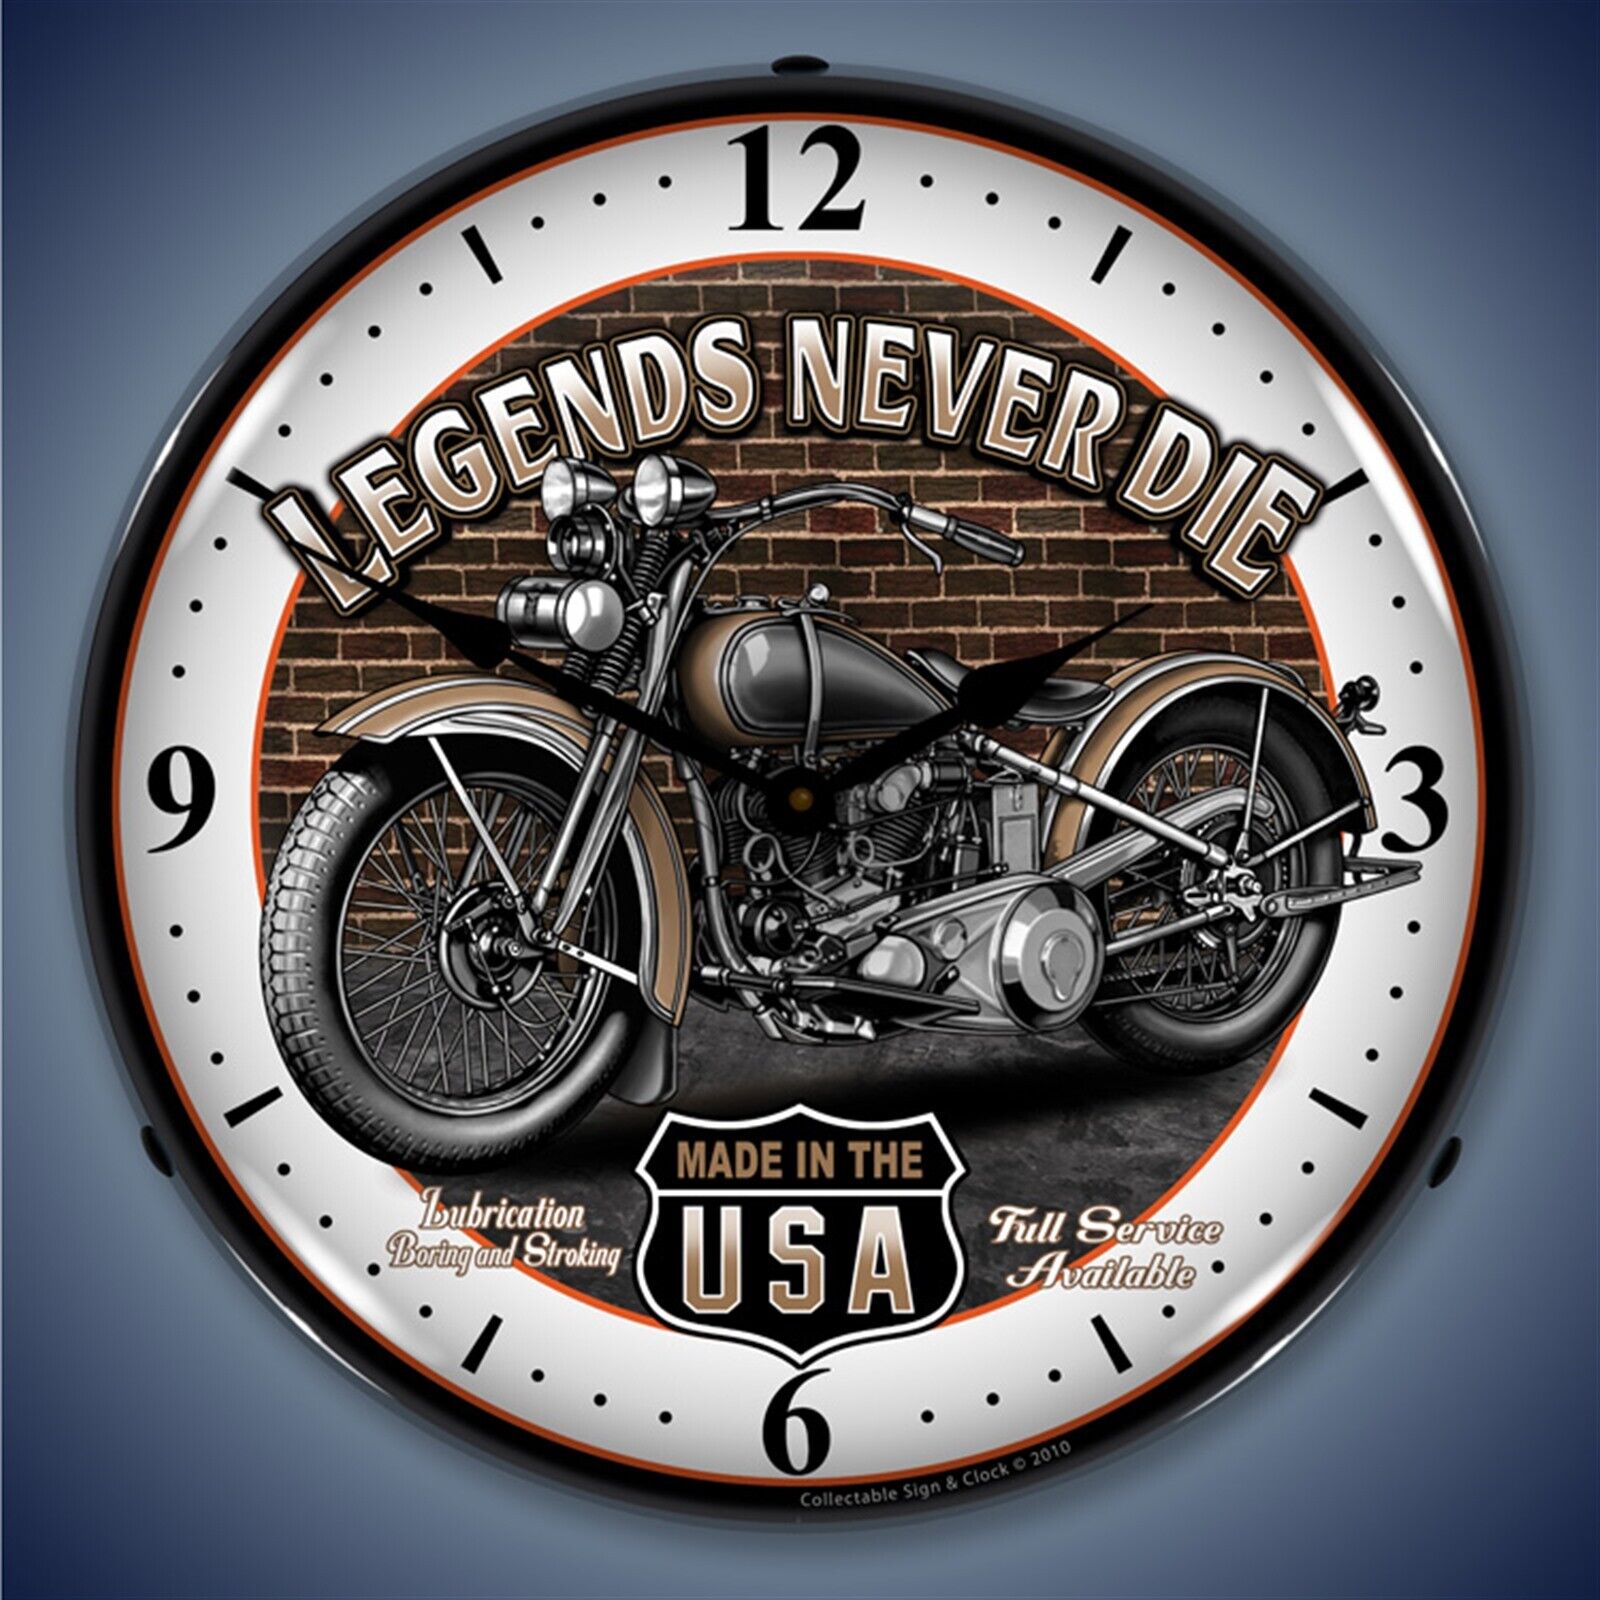 Legends Never Die Motorcycle Wall Clock, LED Lighted